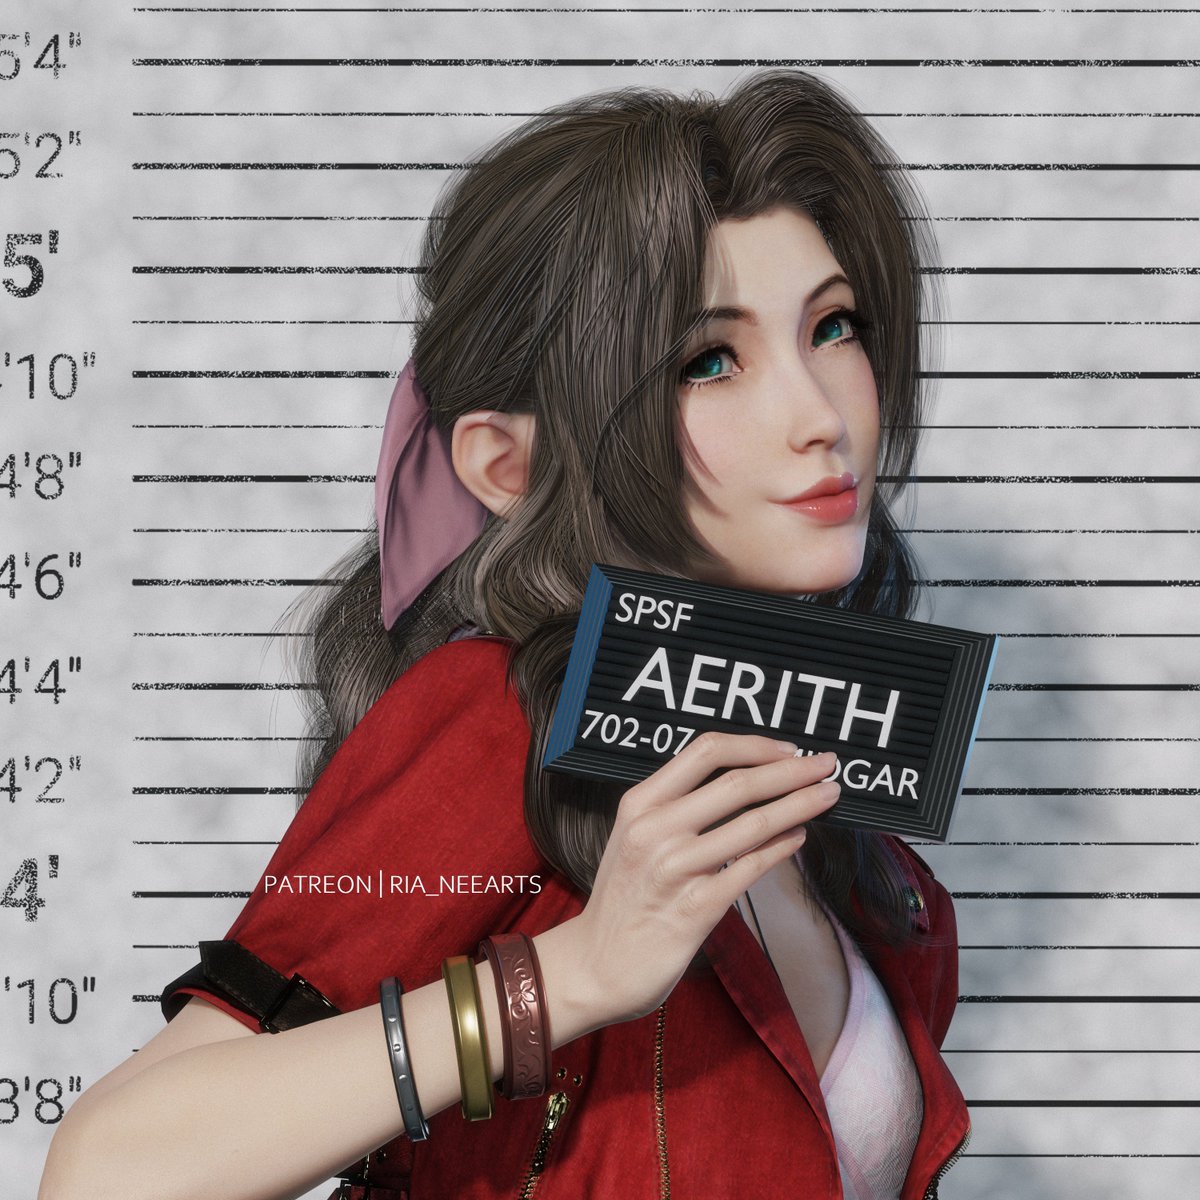 that Barbie meme but with them
'but mama I'm in love with a criminal'
#FFVIIRemake